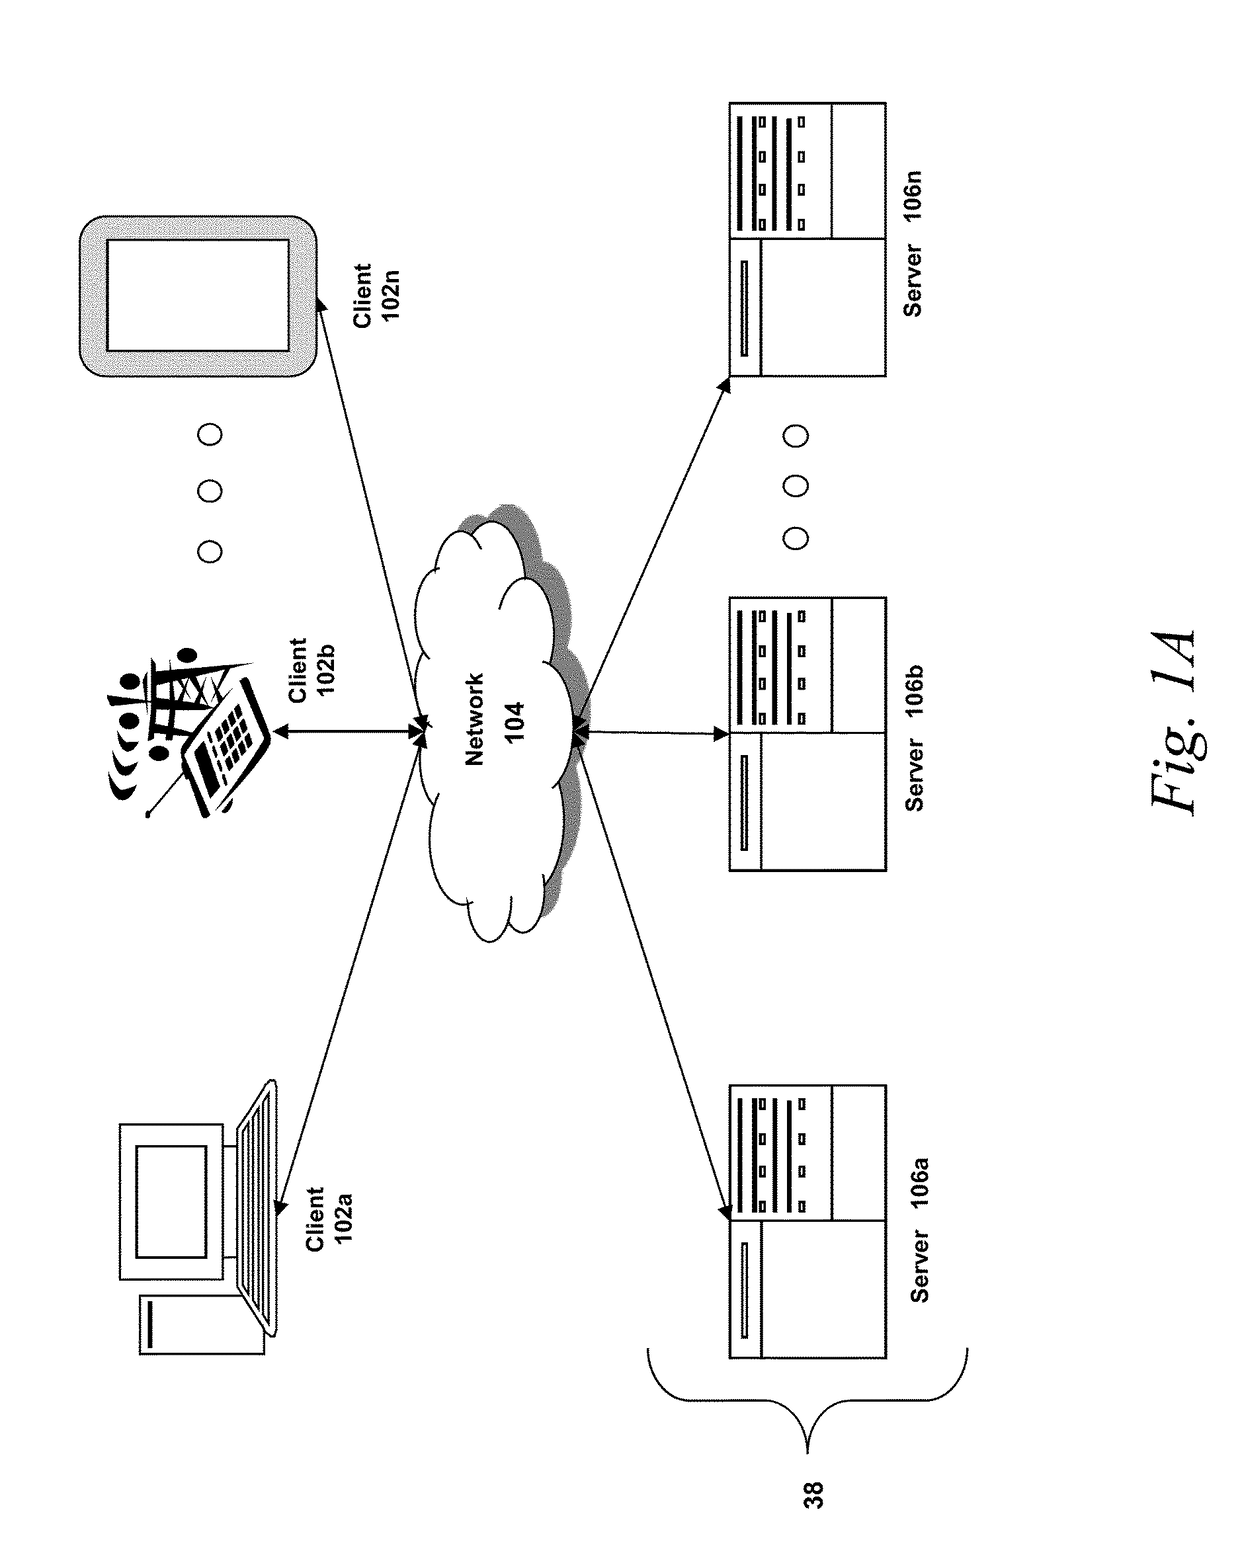 Systems and methods for creating and running heterogeneous phishing attack campaigns